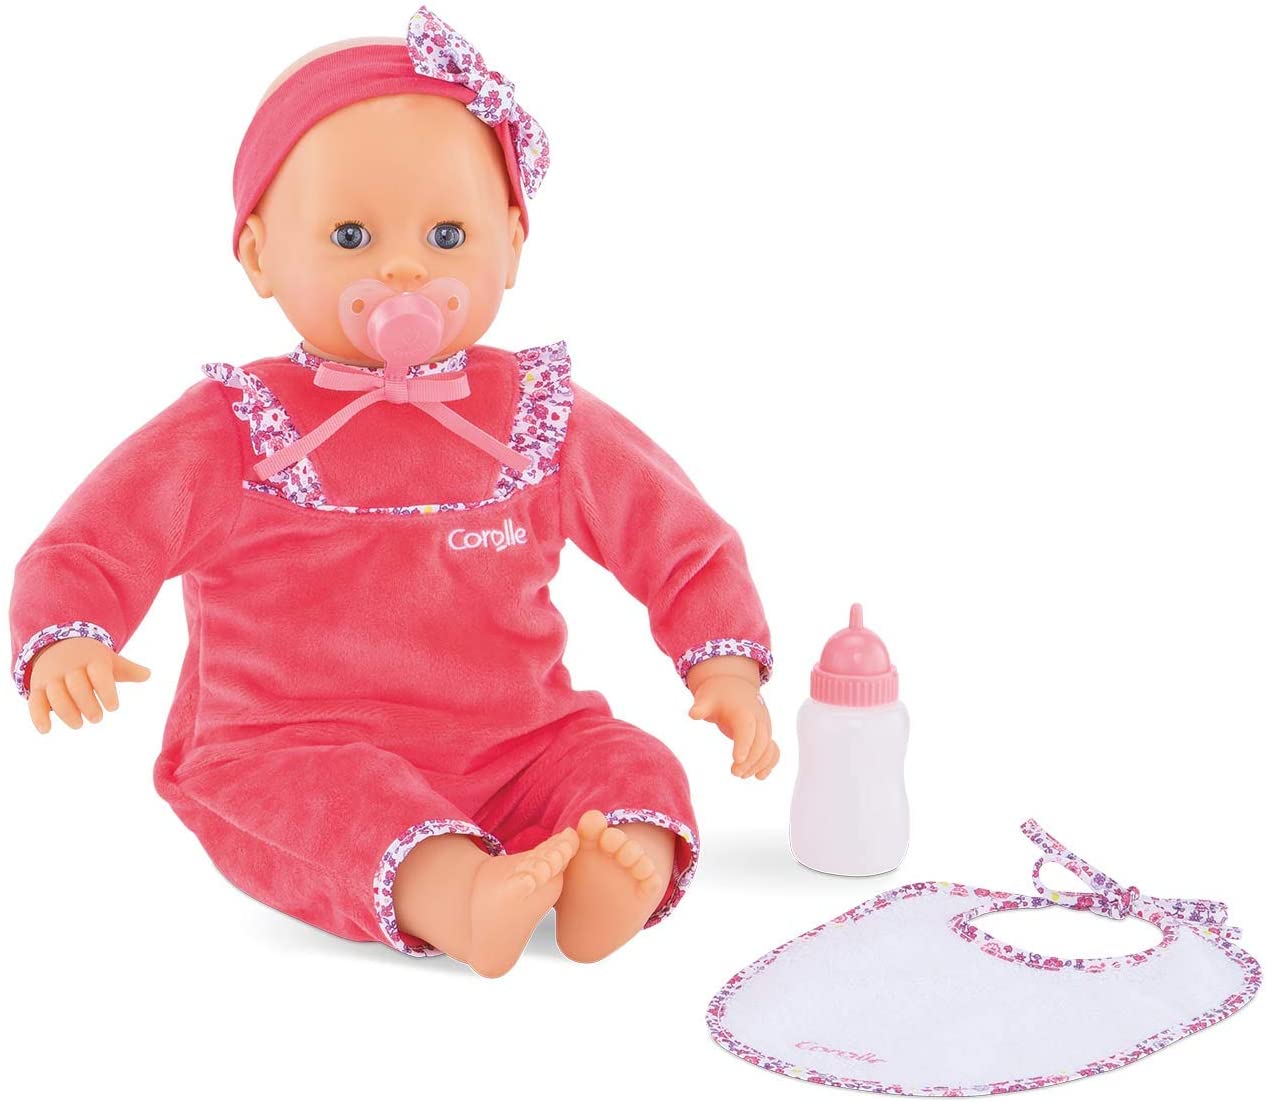 Corolle Mon Grand Poupon Lila Chérie - Large 17" Interactive Toy Baby Doll with 3 Accessories, for Ages 2 Years